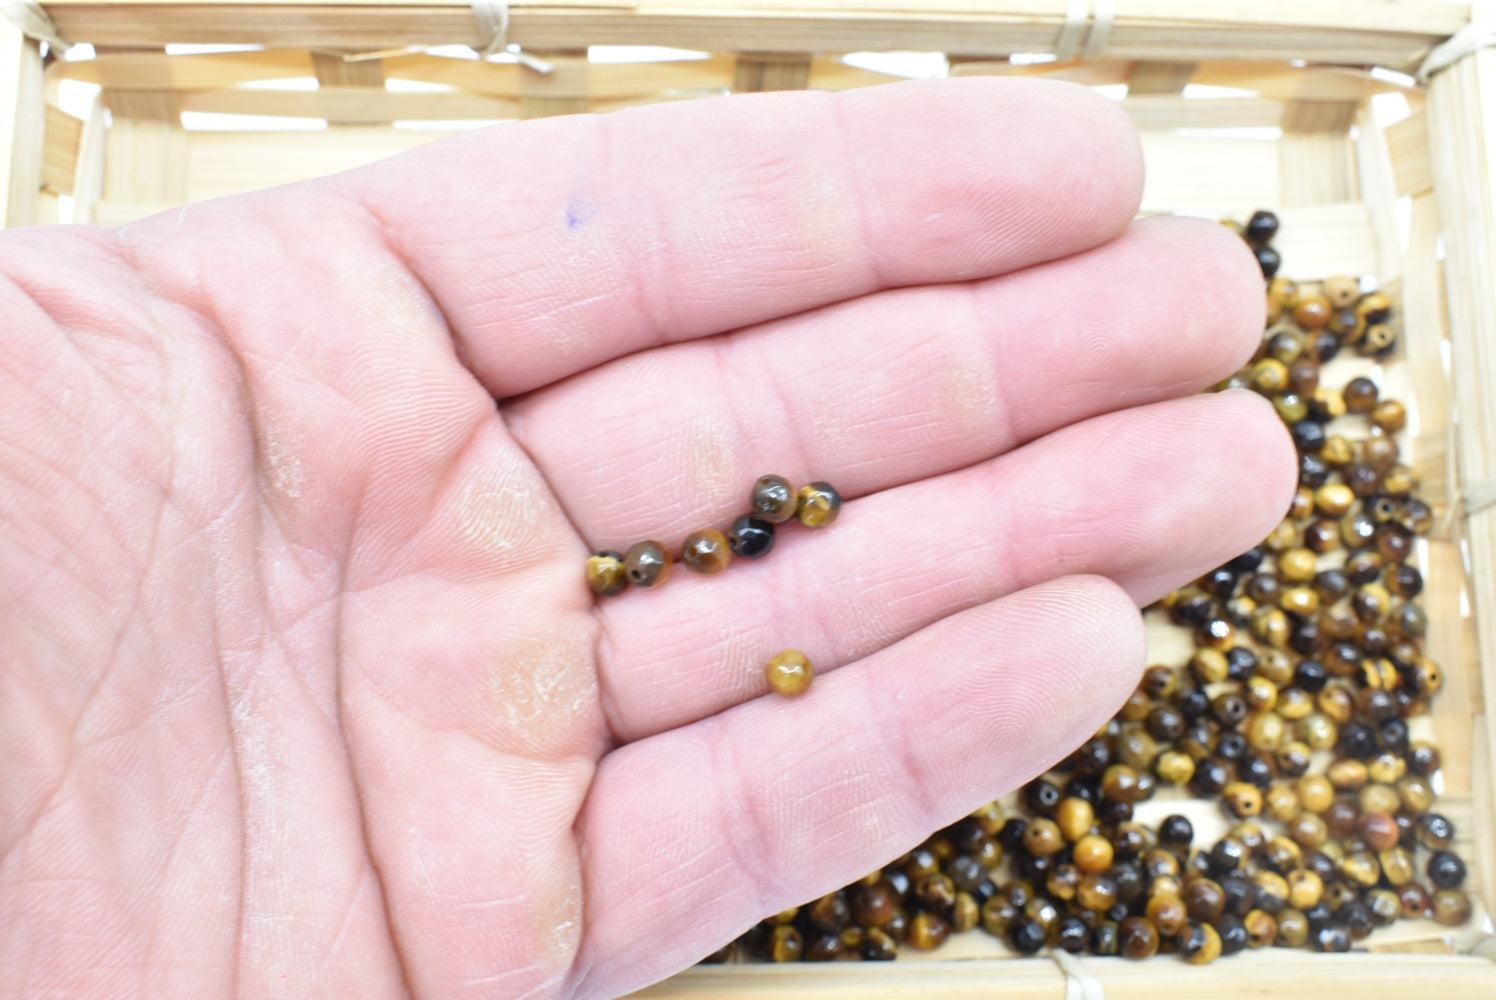 4 mm Tiger Eye Beads Perforated - 10 Beads